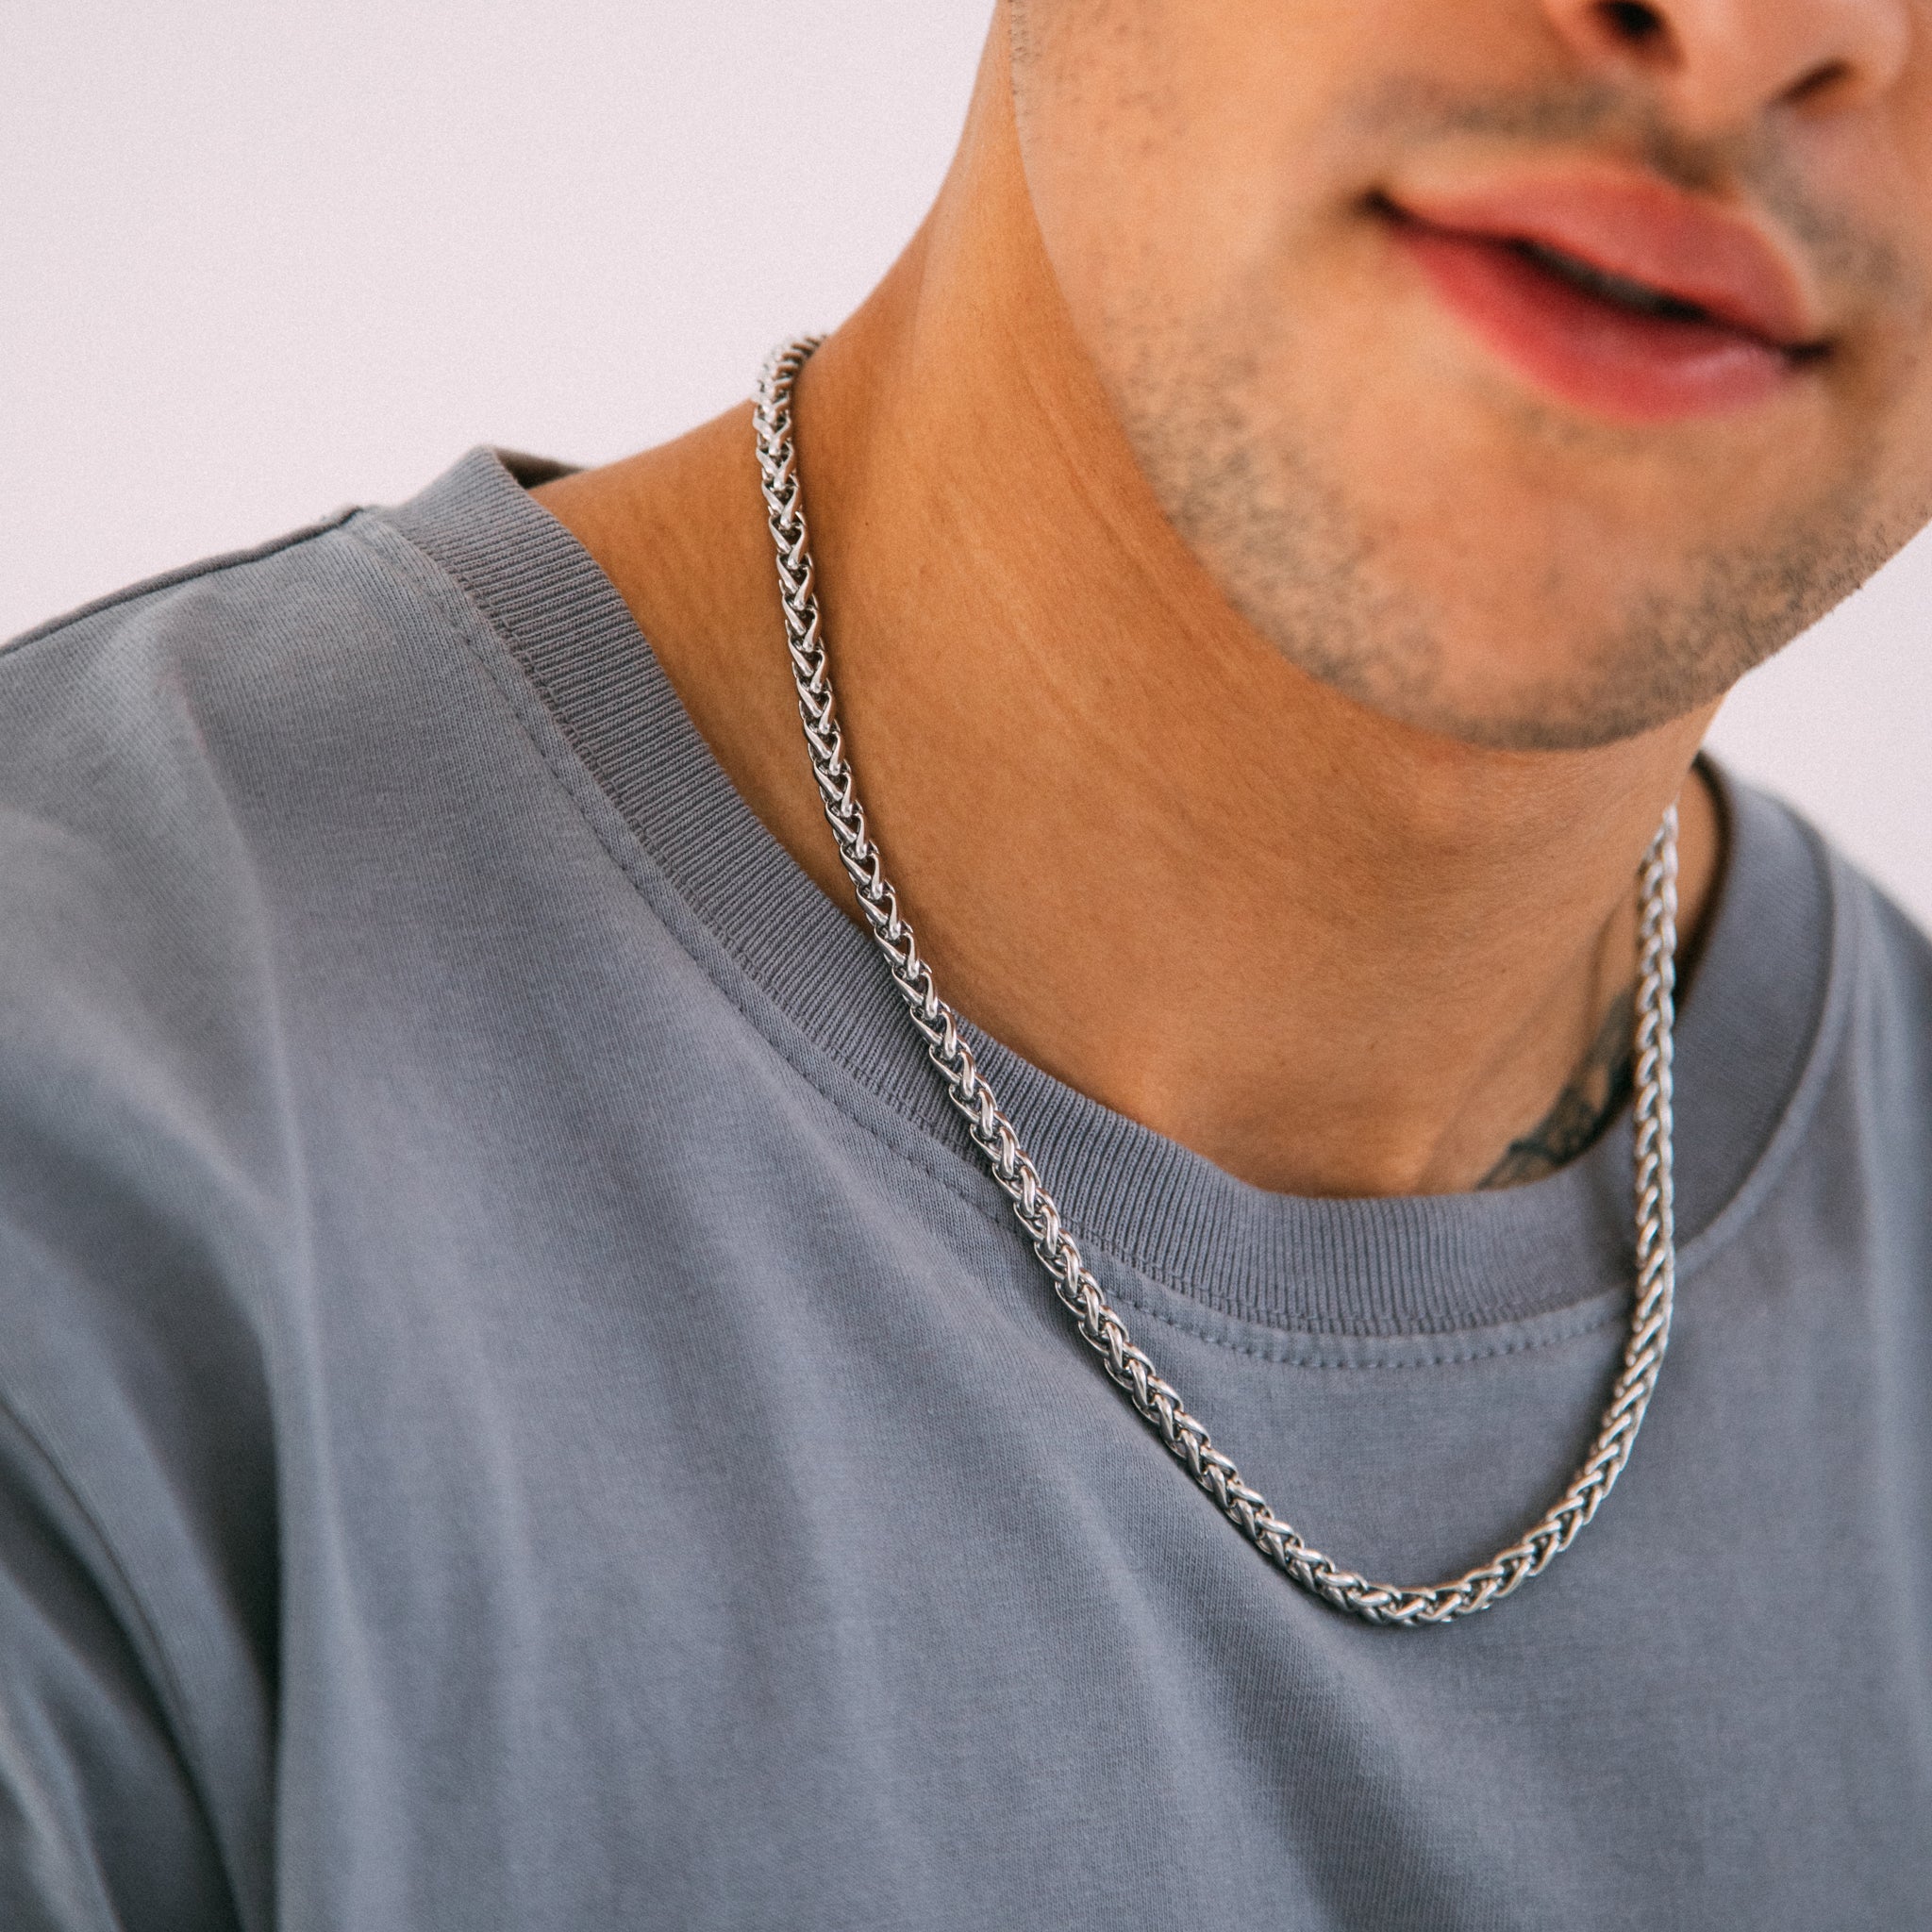 Buy Stainless Steel Necklaces for Men Women, 3mm Wheat Chain Necklace  Choker, Wholesale Mens Necklace Gold & Silver Online in India - Etsy